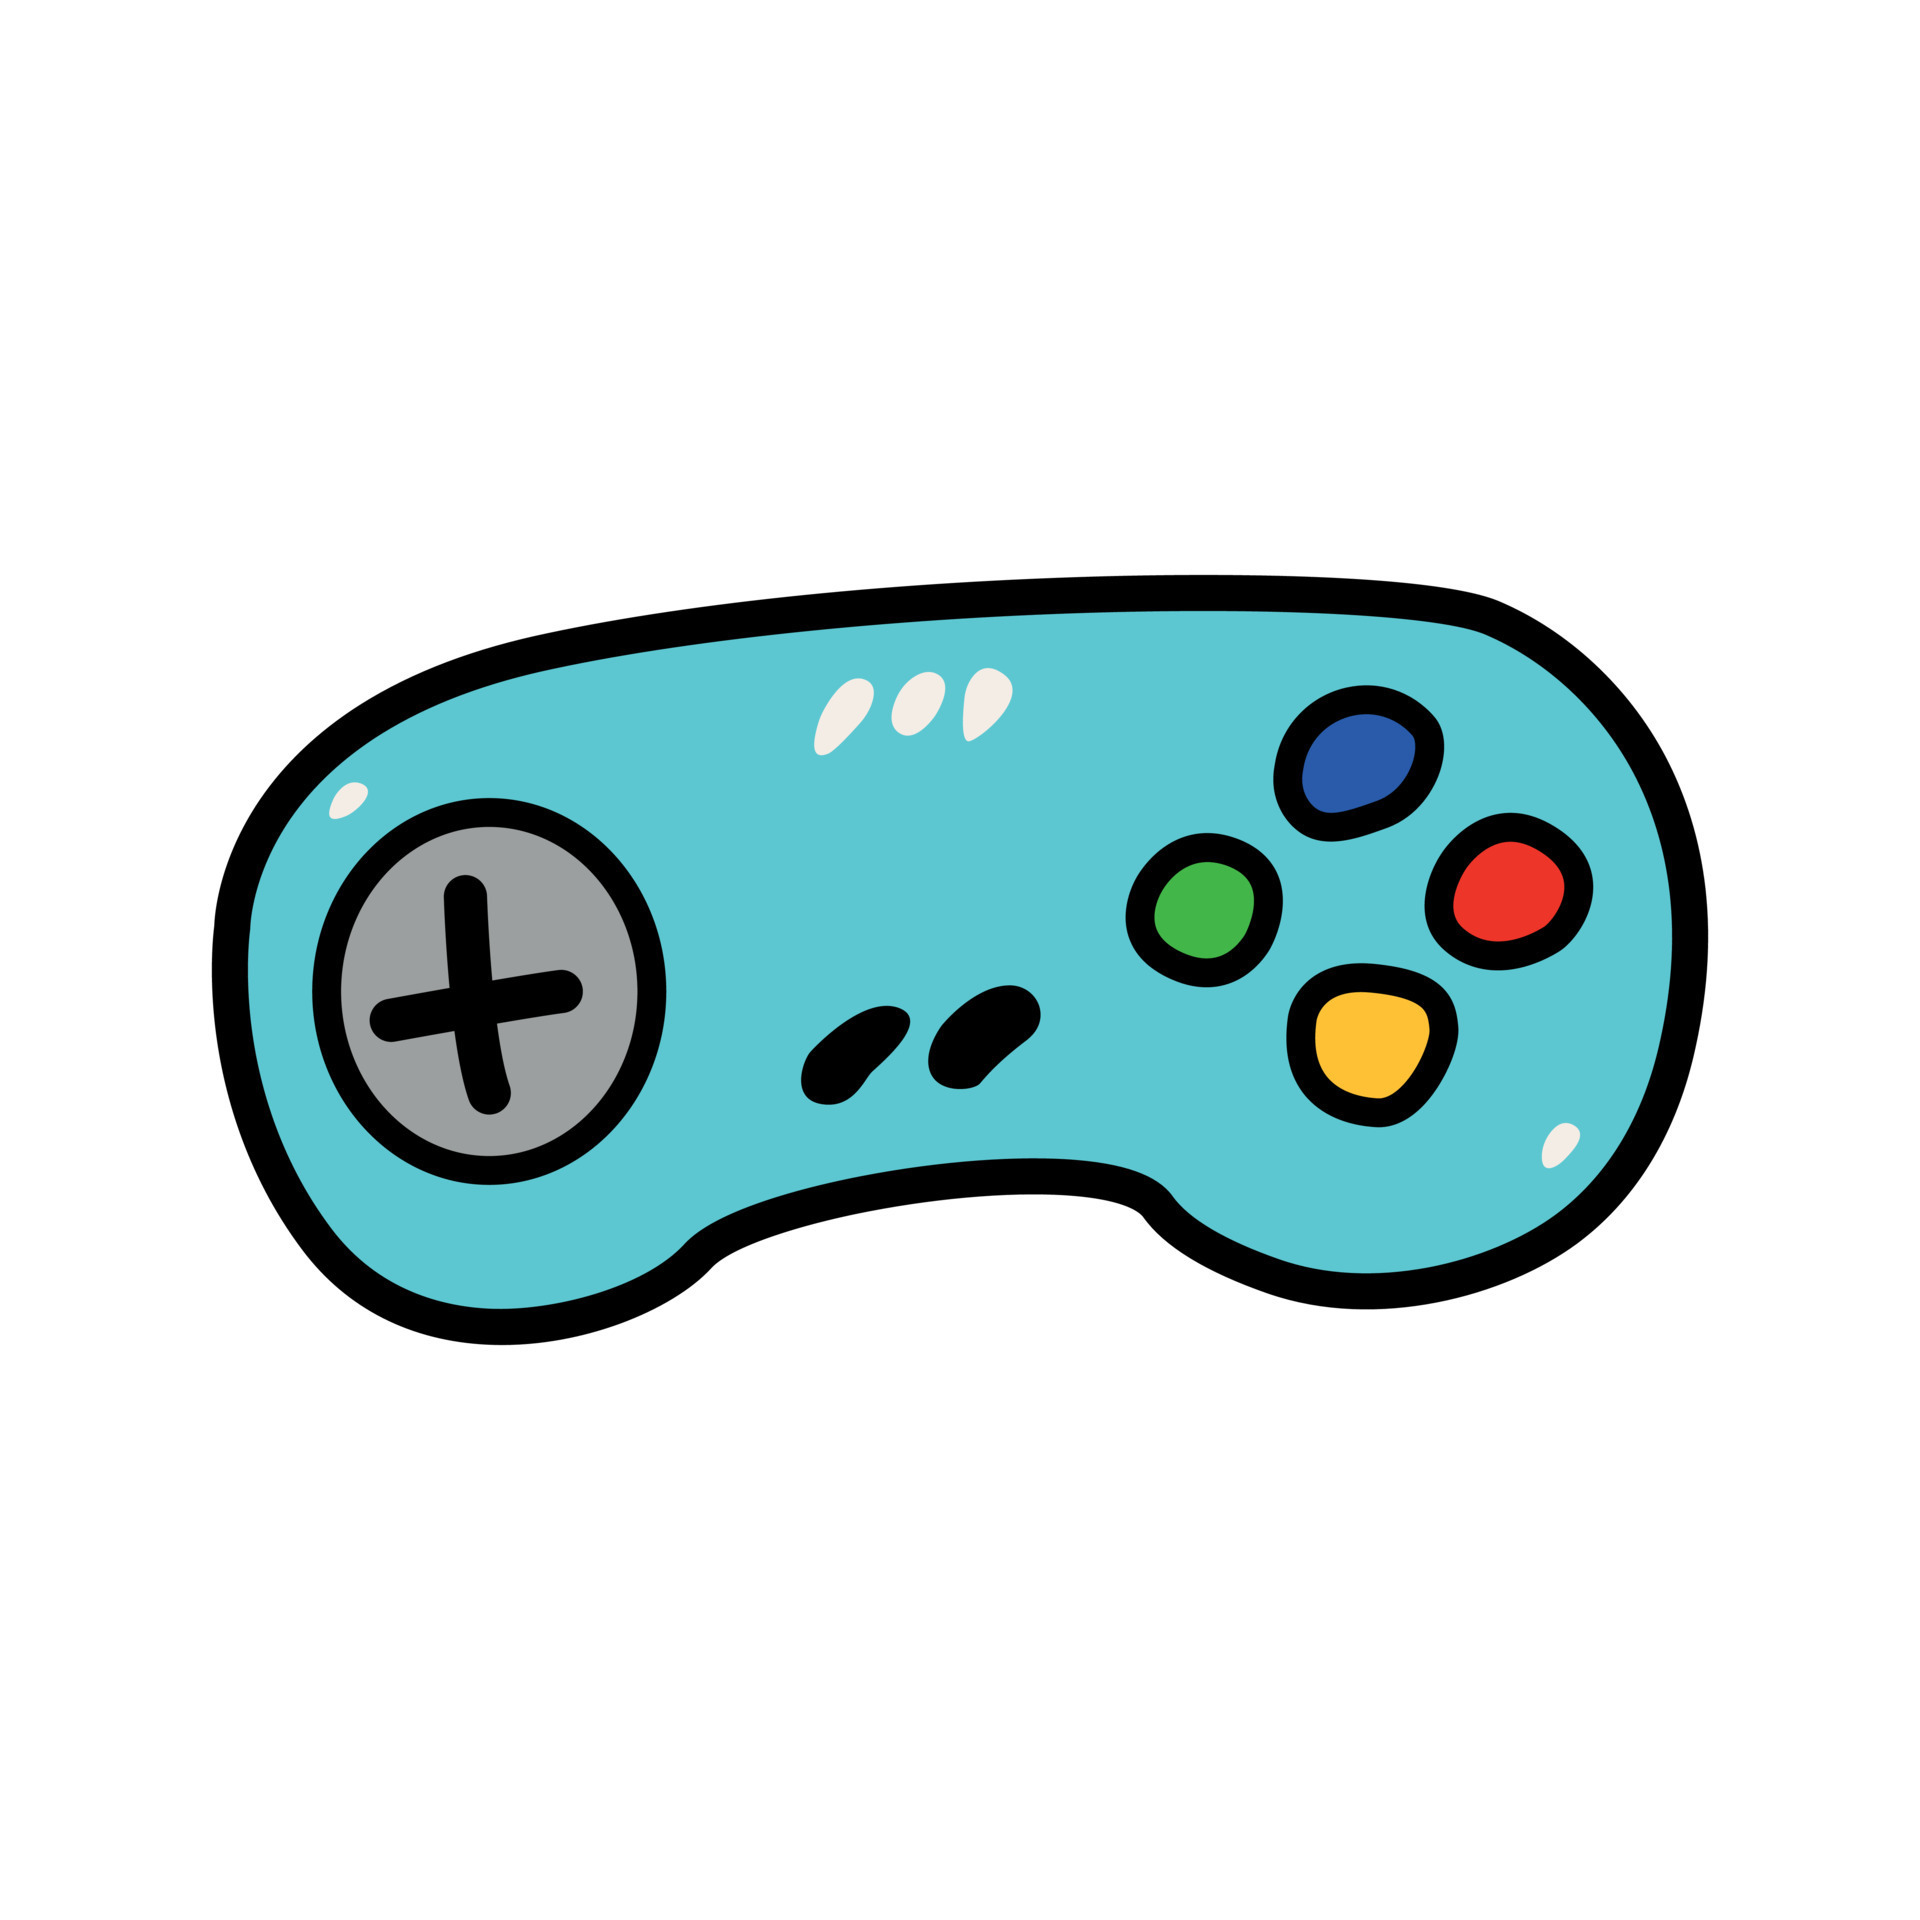 Set of doodle vector icons related to computer games. Joysticks